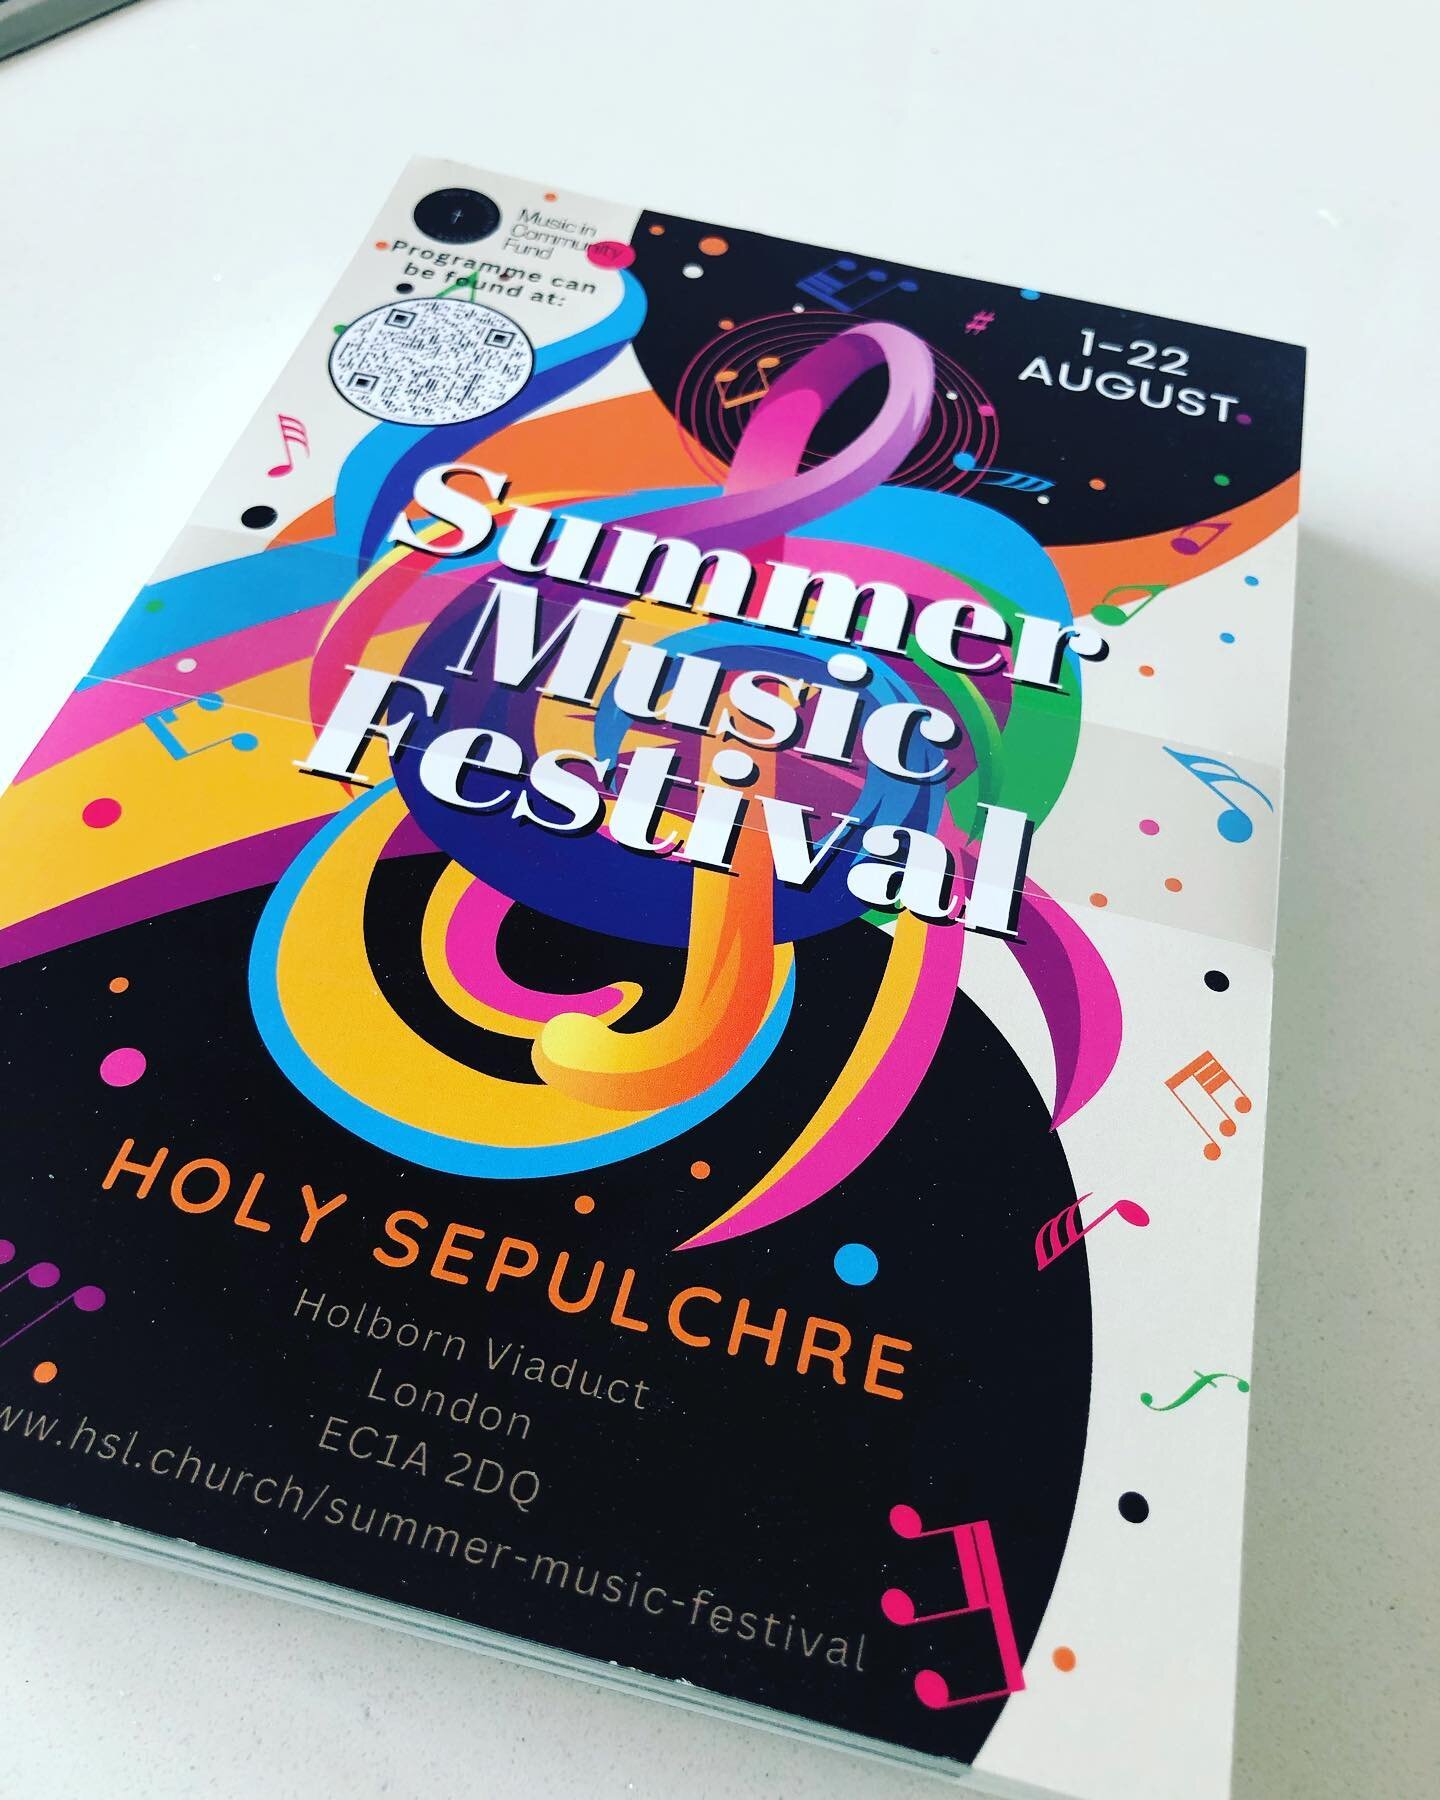 Our shiny new flyers have arrived for our Summer Music Festival ✨ We can&rsquo;t wait, check out the confirmed musicians and programme so far on www.hsl.church/summer-music-festival 
#summerfestival #music #nationalmusicianschurch #london #freeconcer